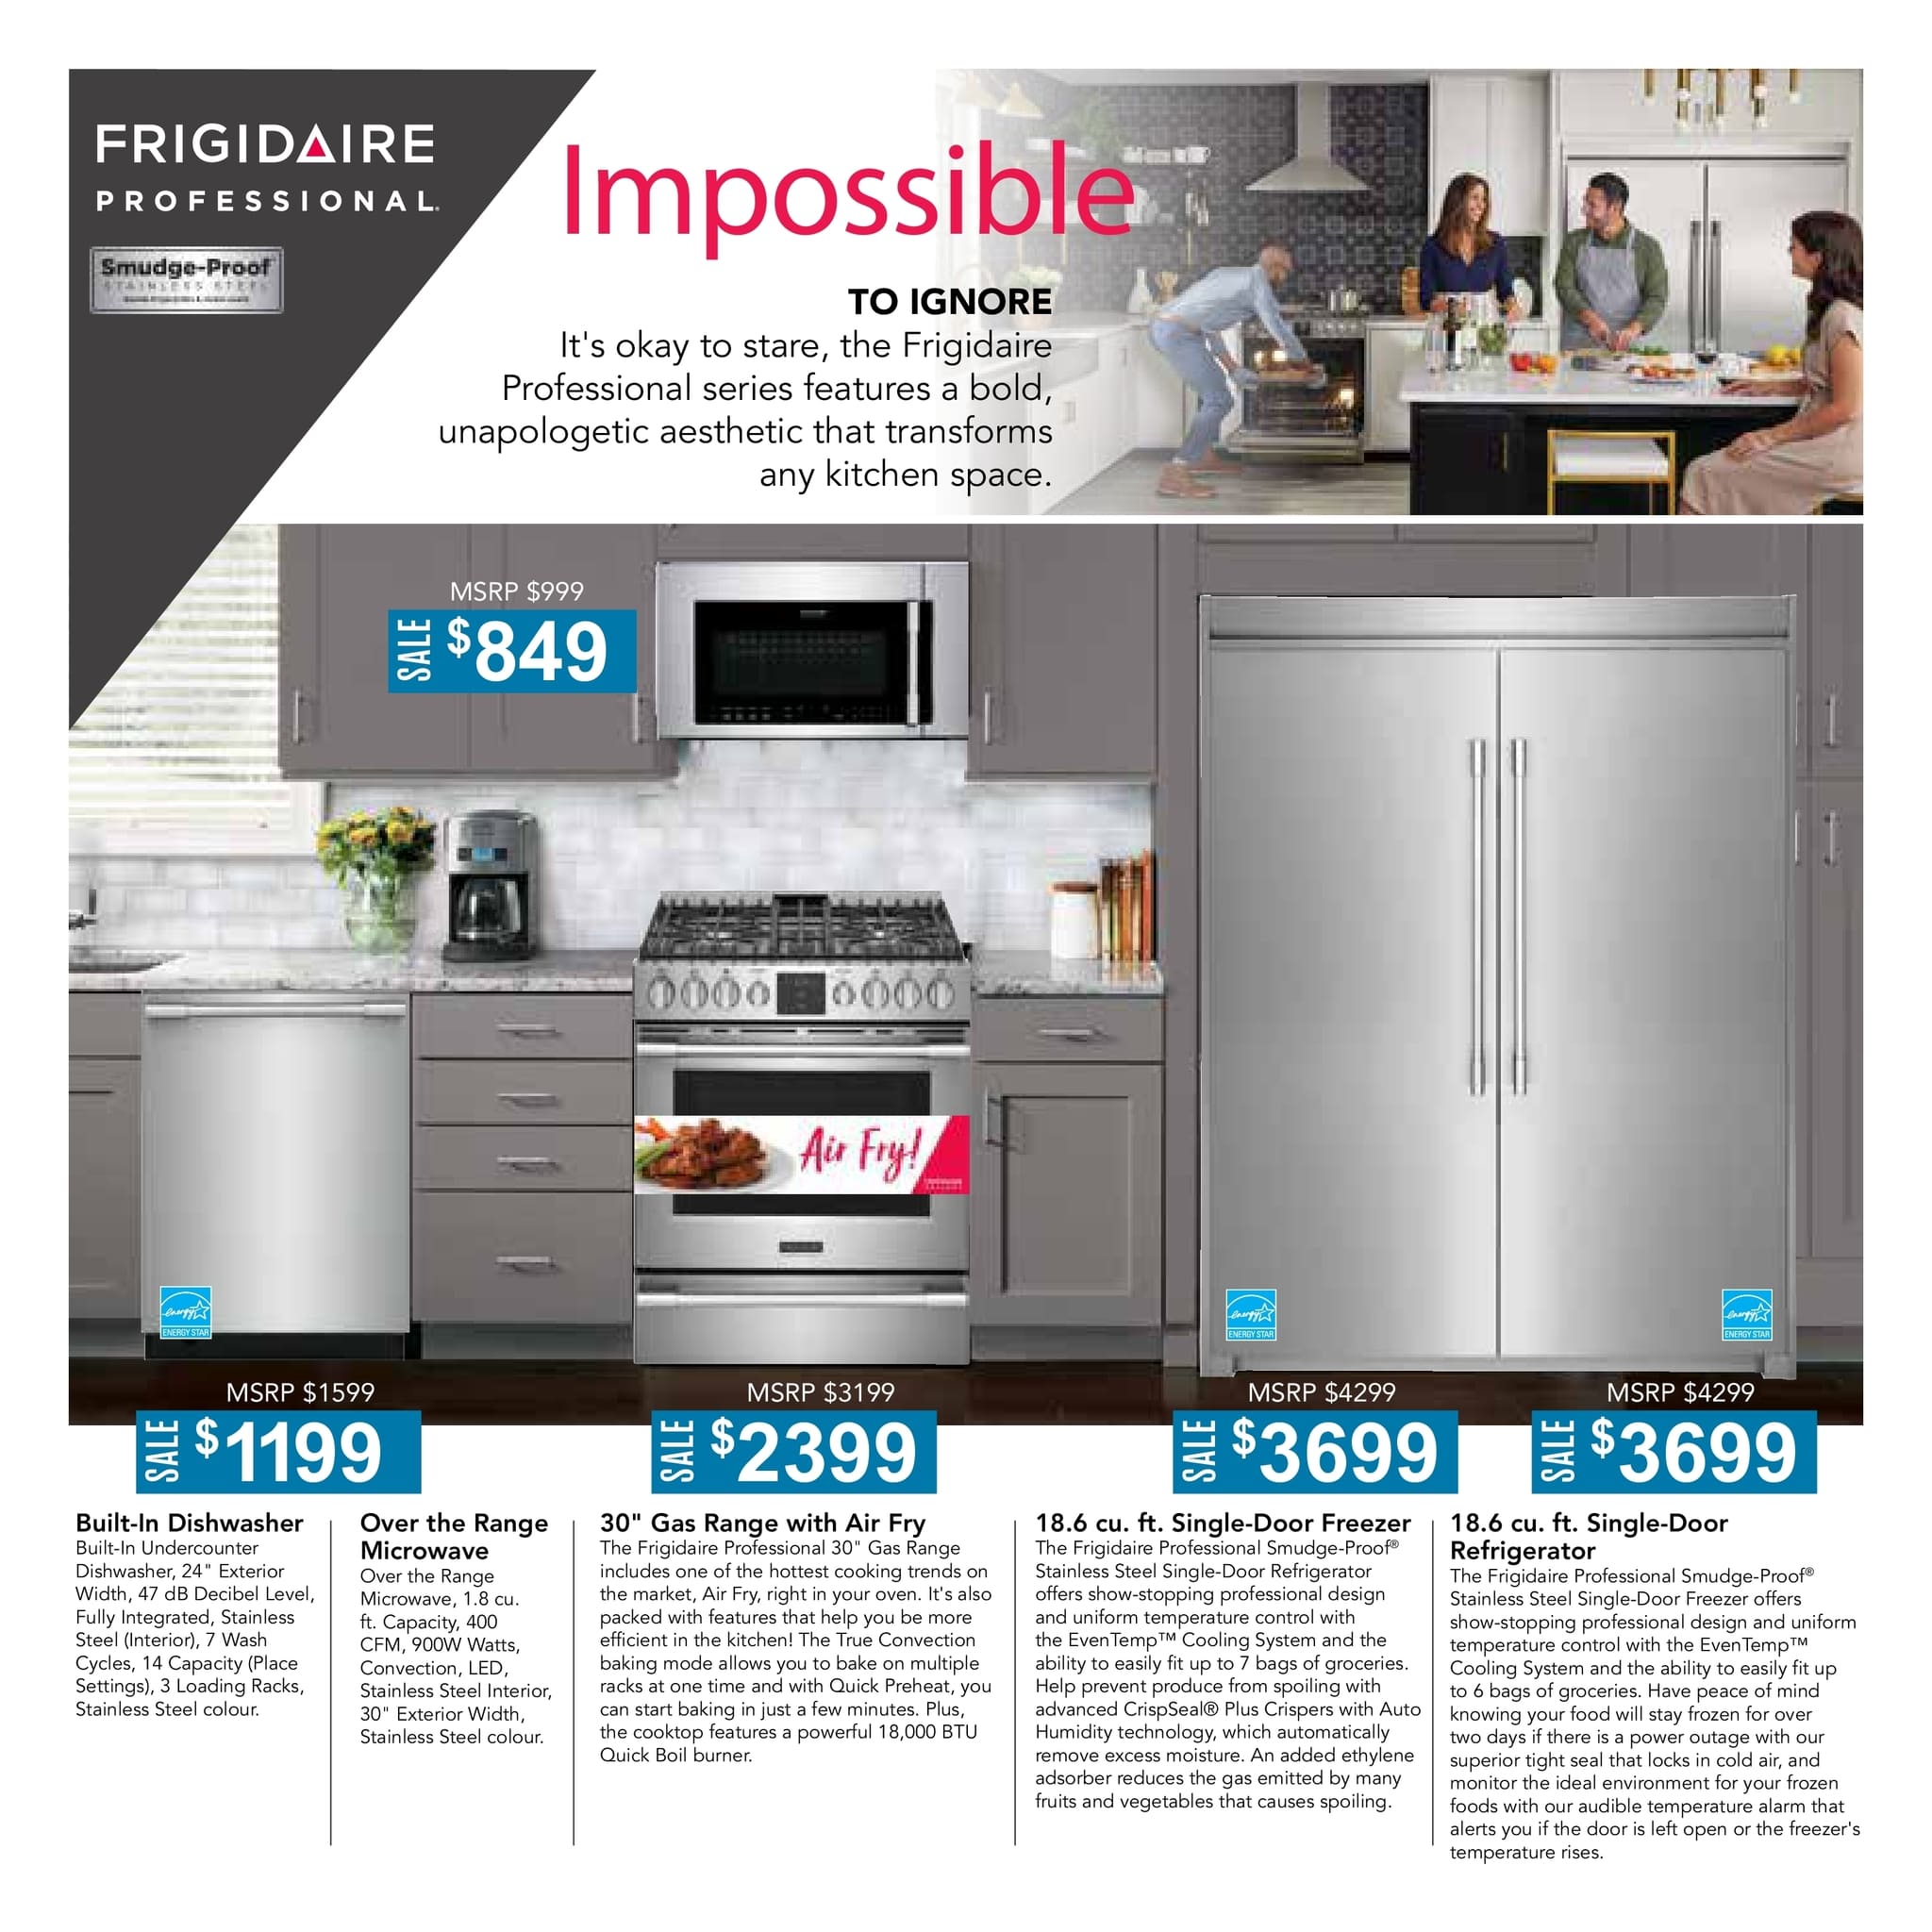 St. Albert Home - Frigidaire - Page 3